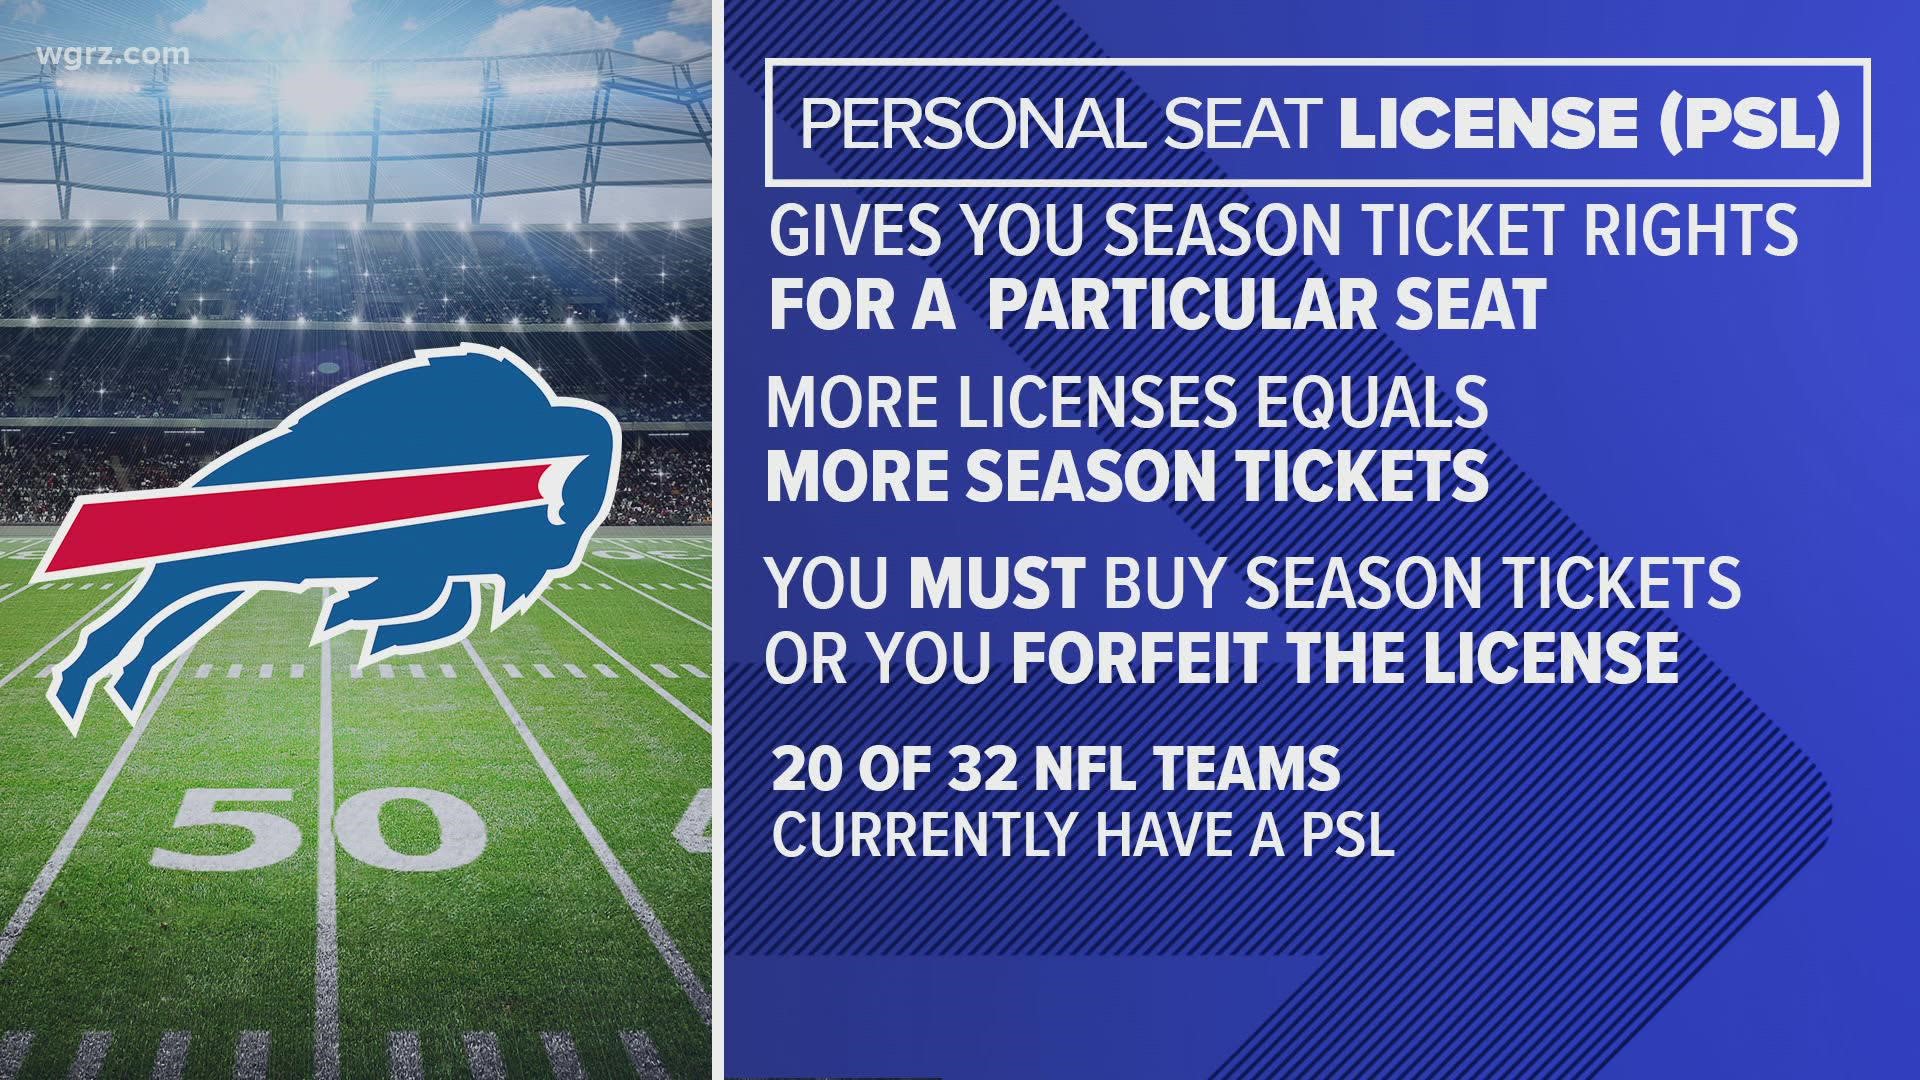 Part of the new stadium deal includes what's called a personal seat license and it will be very important for season ticket holders to understand.